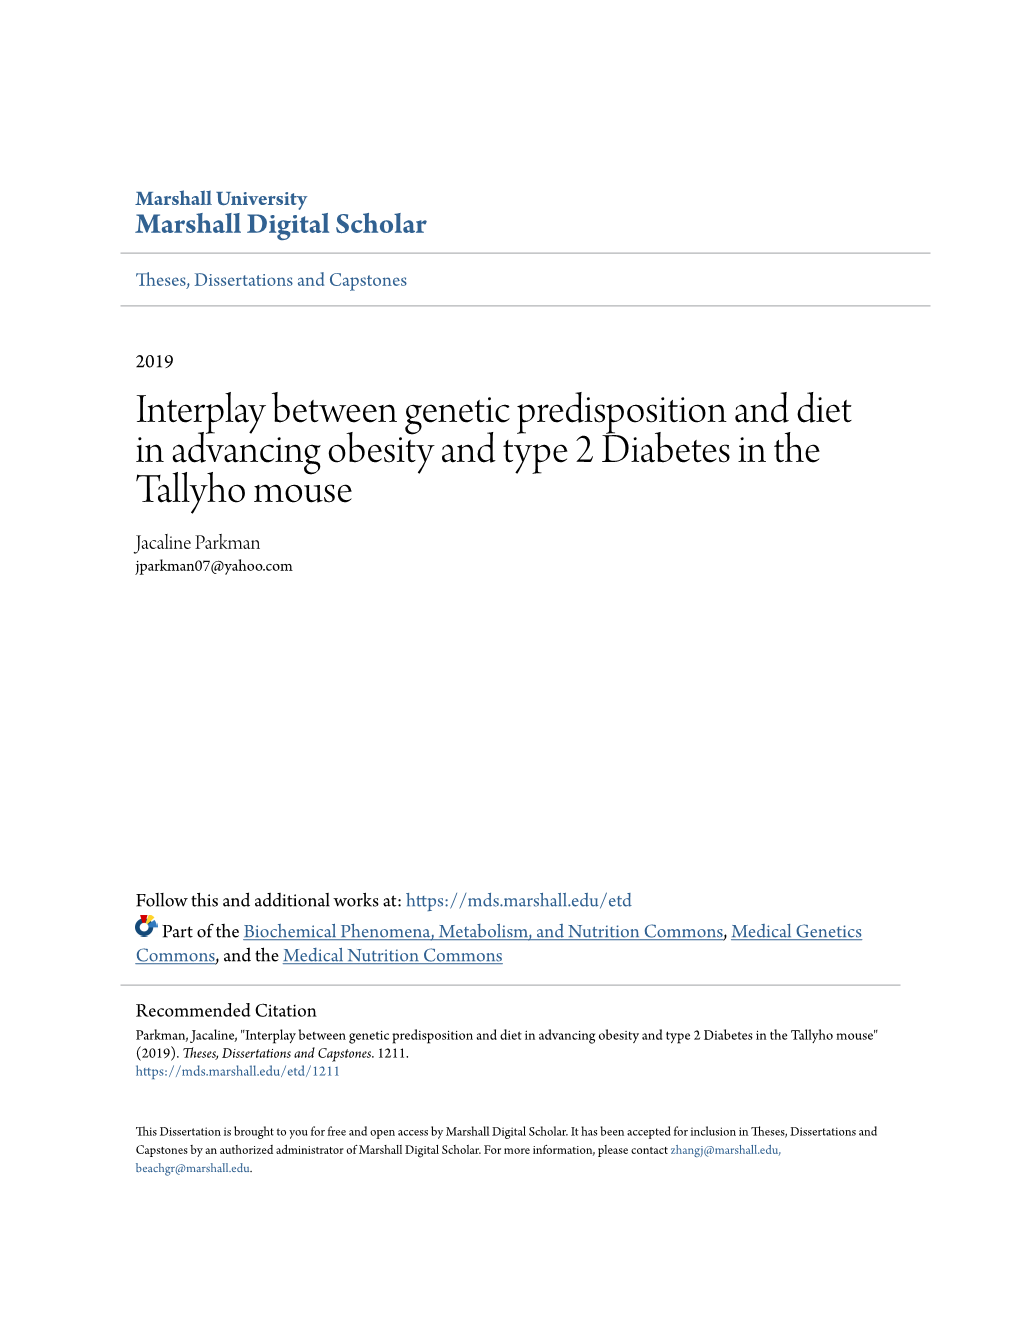 Interplay Between Genetic Predisposition and Diet in Advancing Obesity and Type 2 Diabetes in the Tallyho Mouse Jacaline Parkman Jparkman07@Yahoo.Com